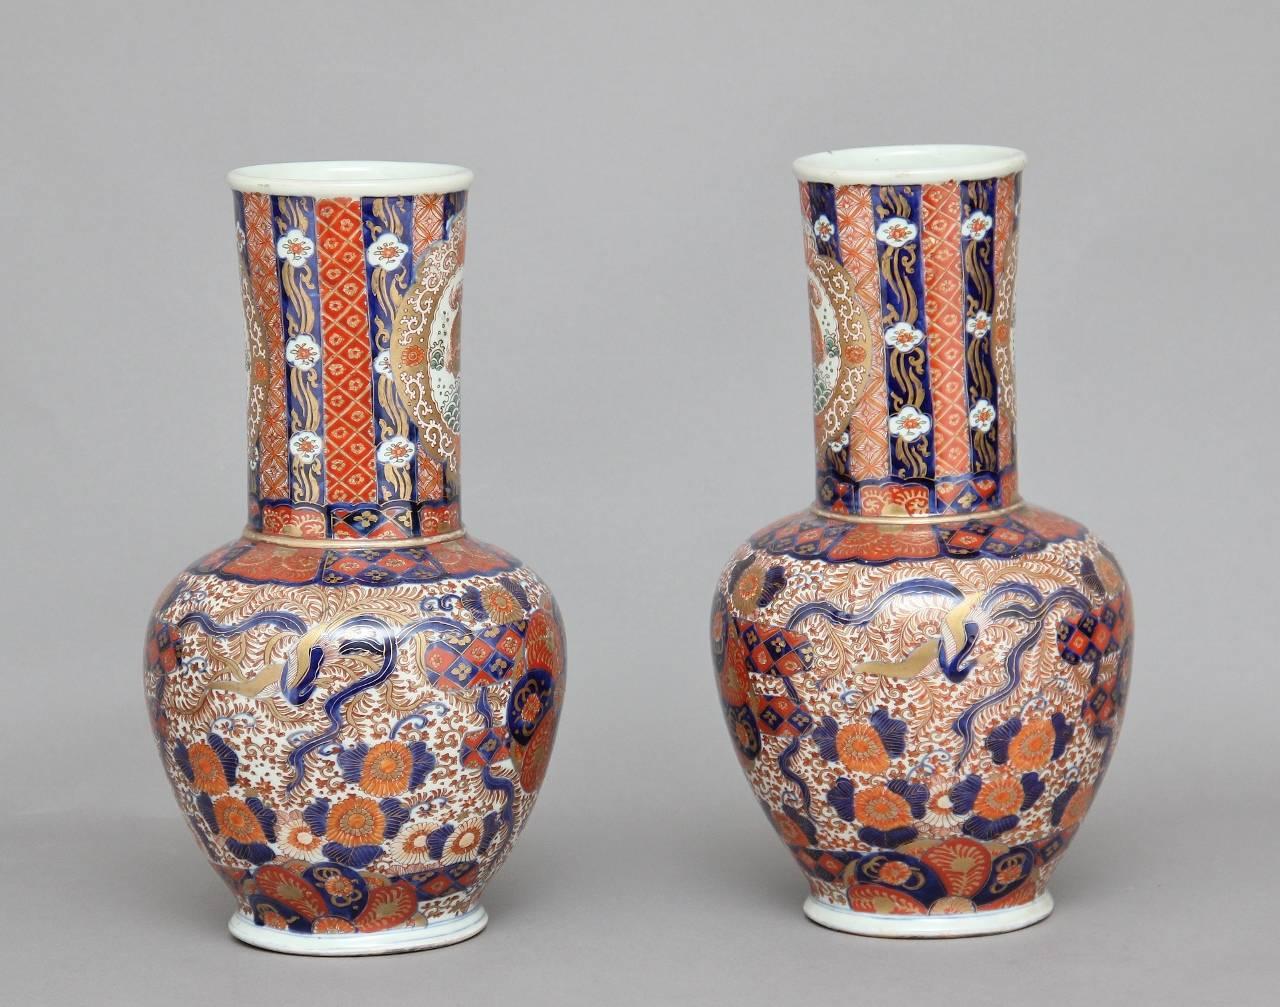 A decorative pair of Japanese, 19th century Imari Porcelain vases with a cylindrical neck, decorated throughout with red, blue and gold glazes upon a white ground, in excellent condition, circa 1880.
 